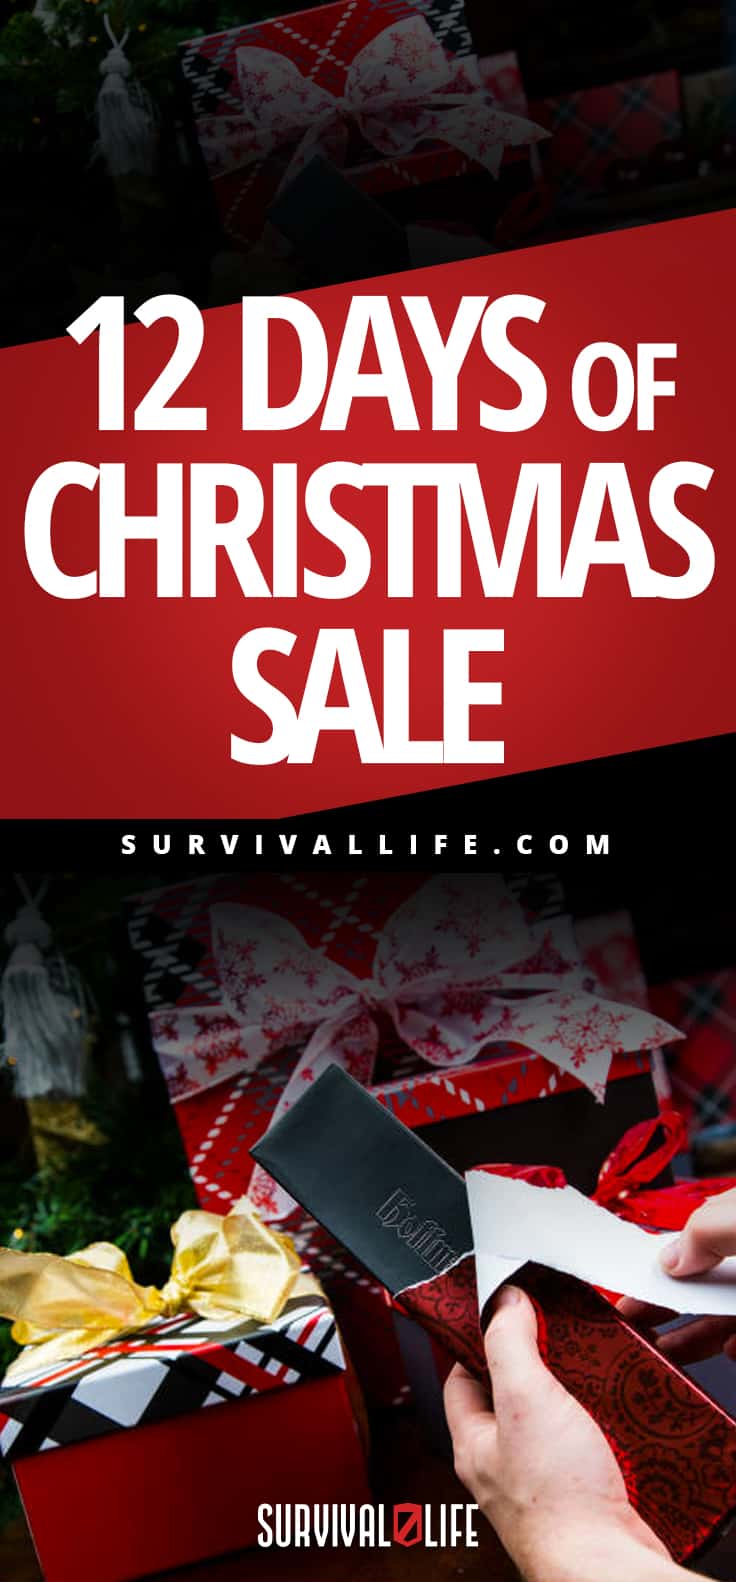 [Exclusive] Survival Life: 12 Days Of Christmas Sale